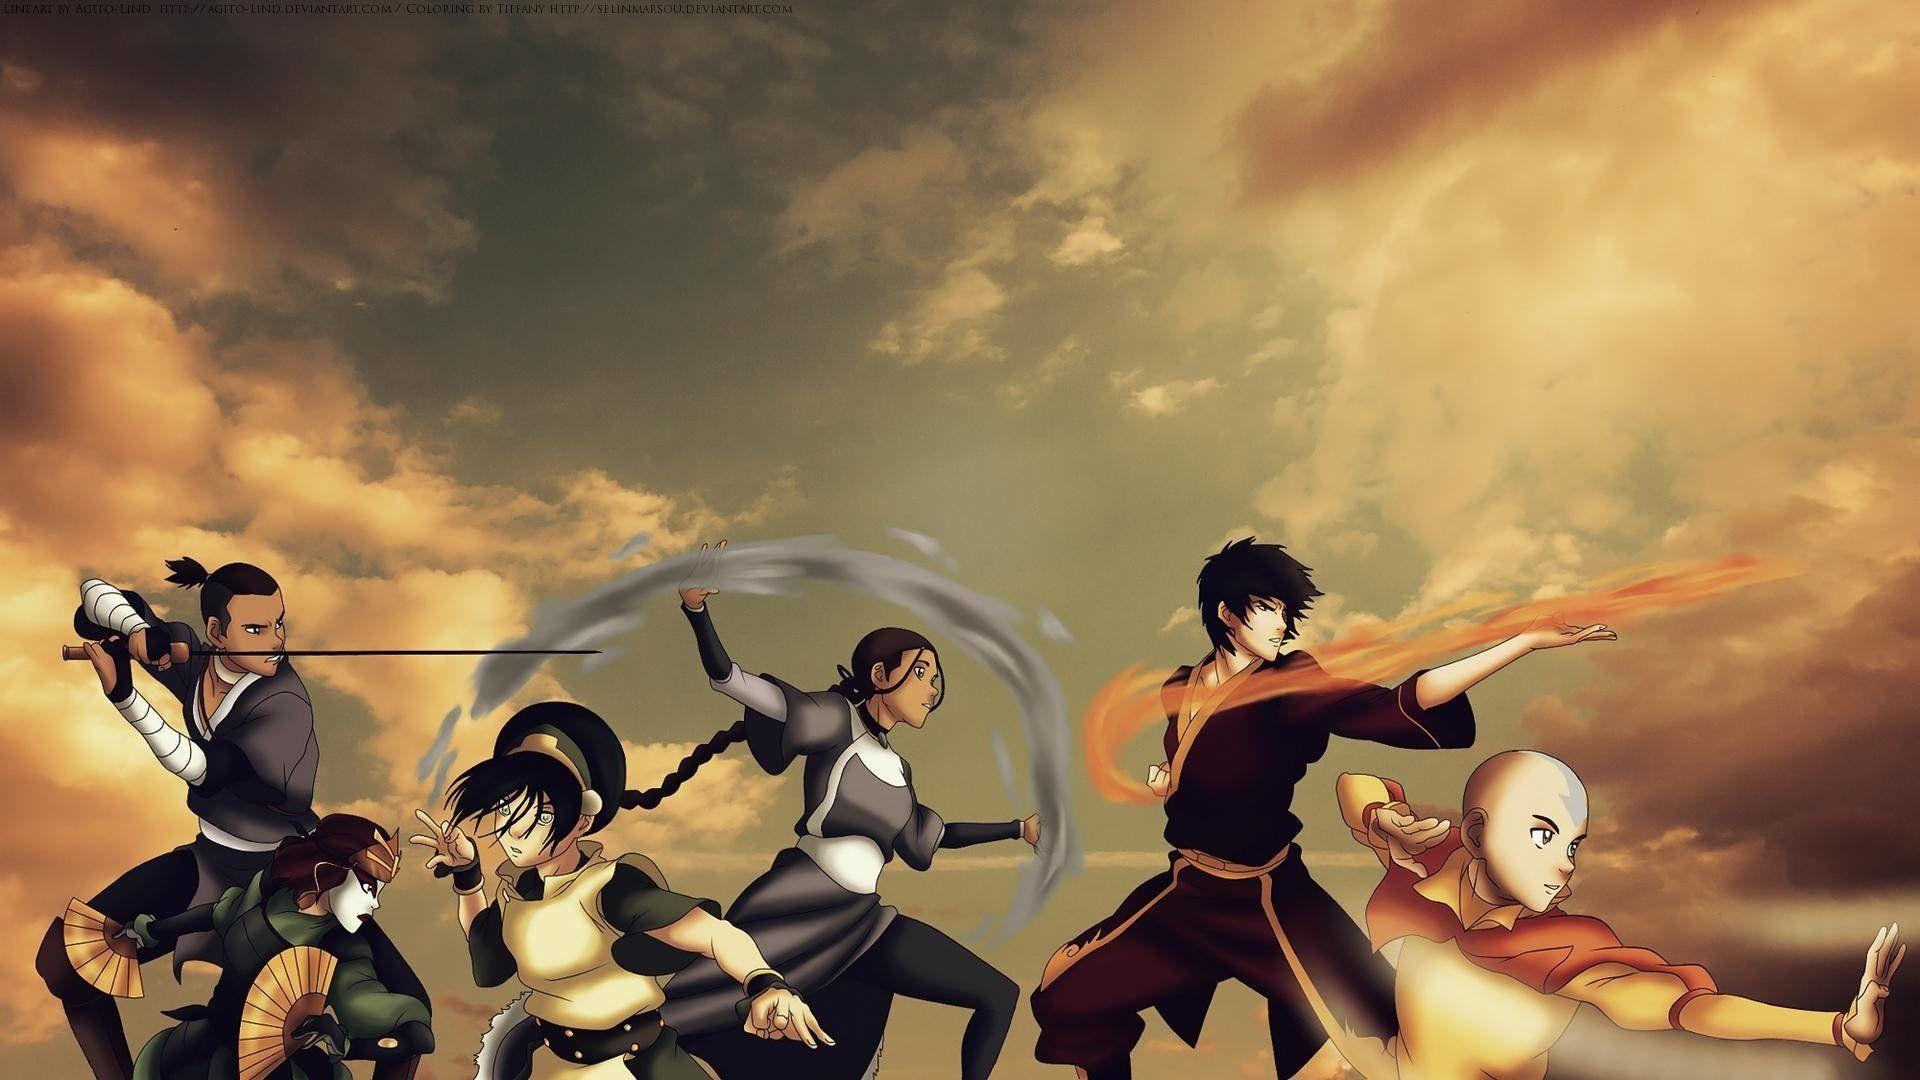 [60+] The Last Airbender HD Wallpapers